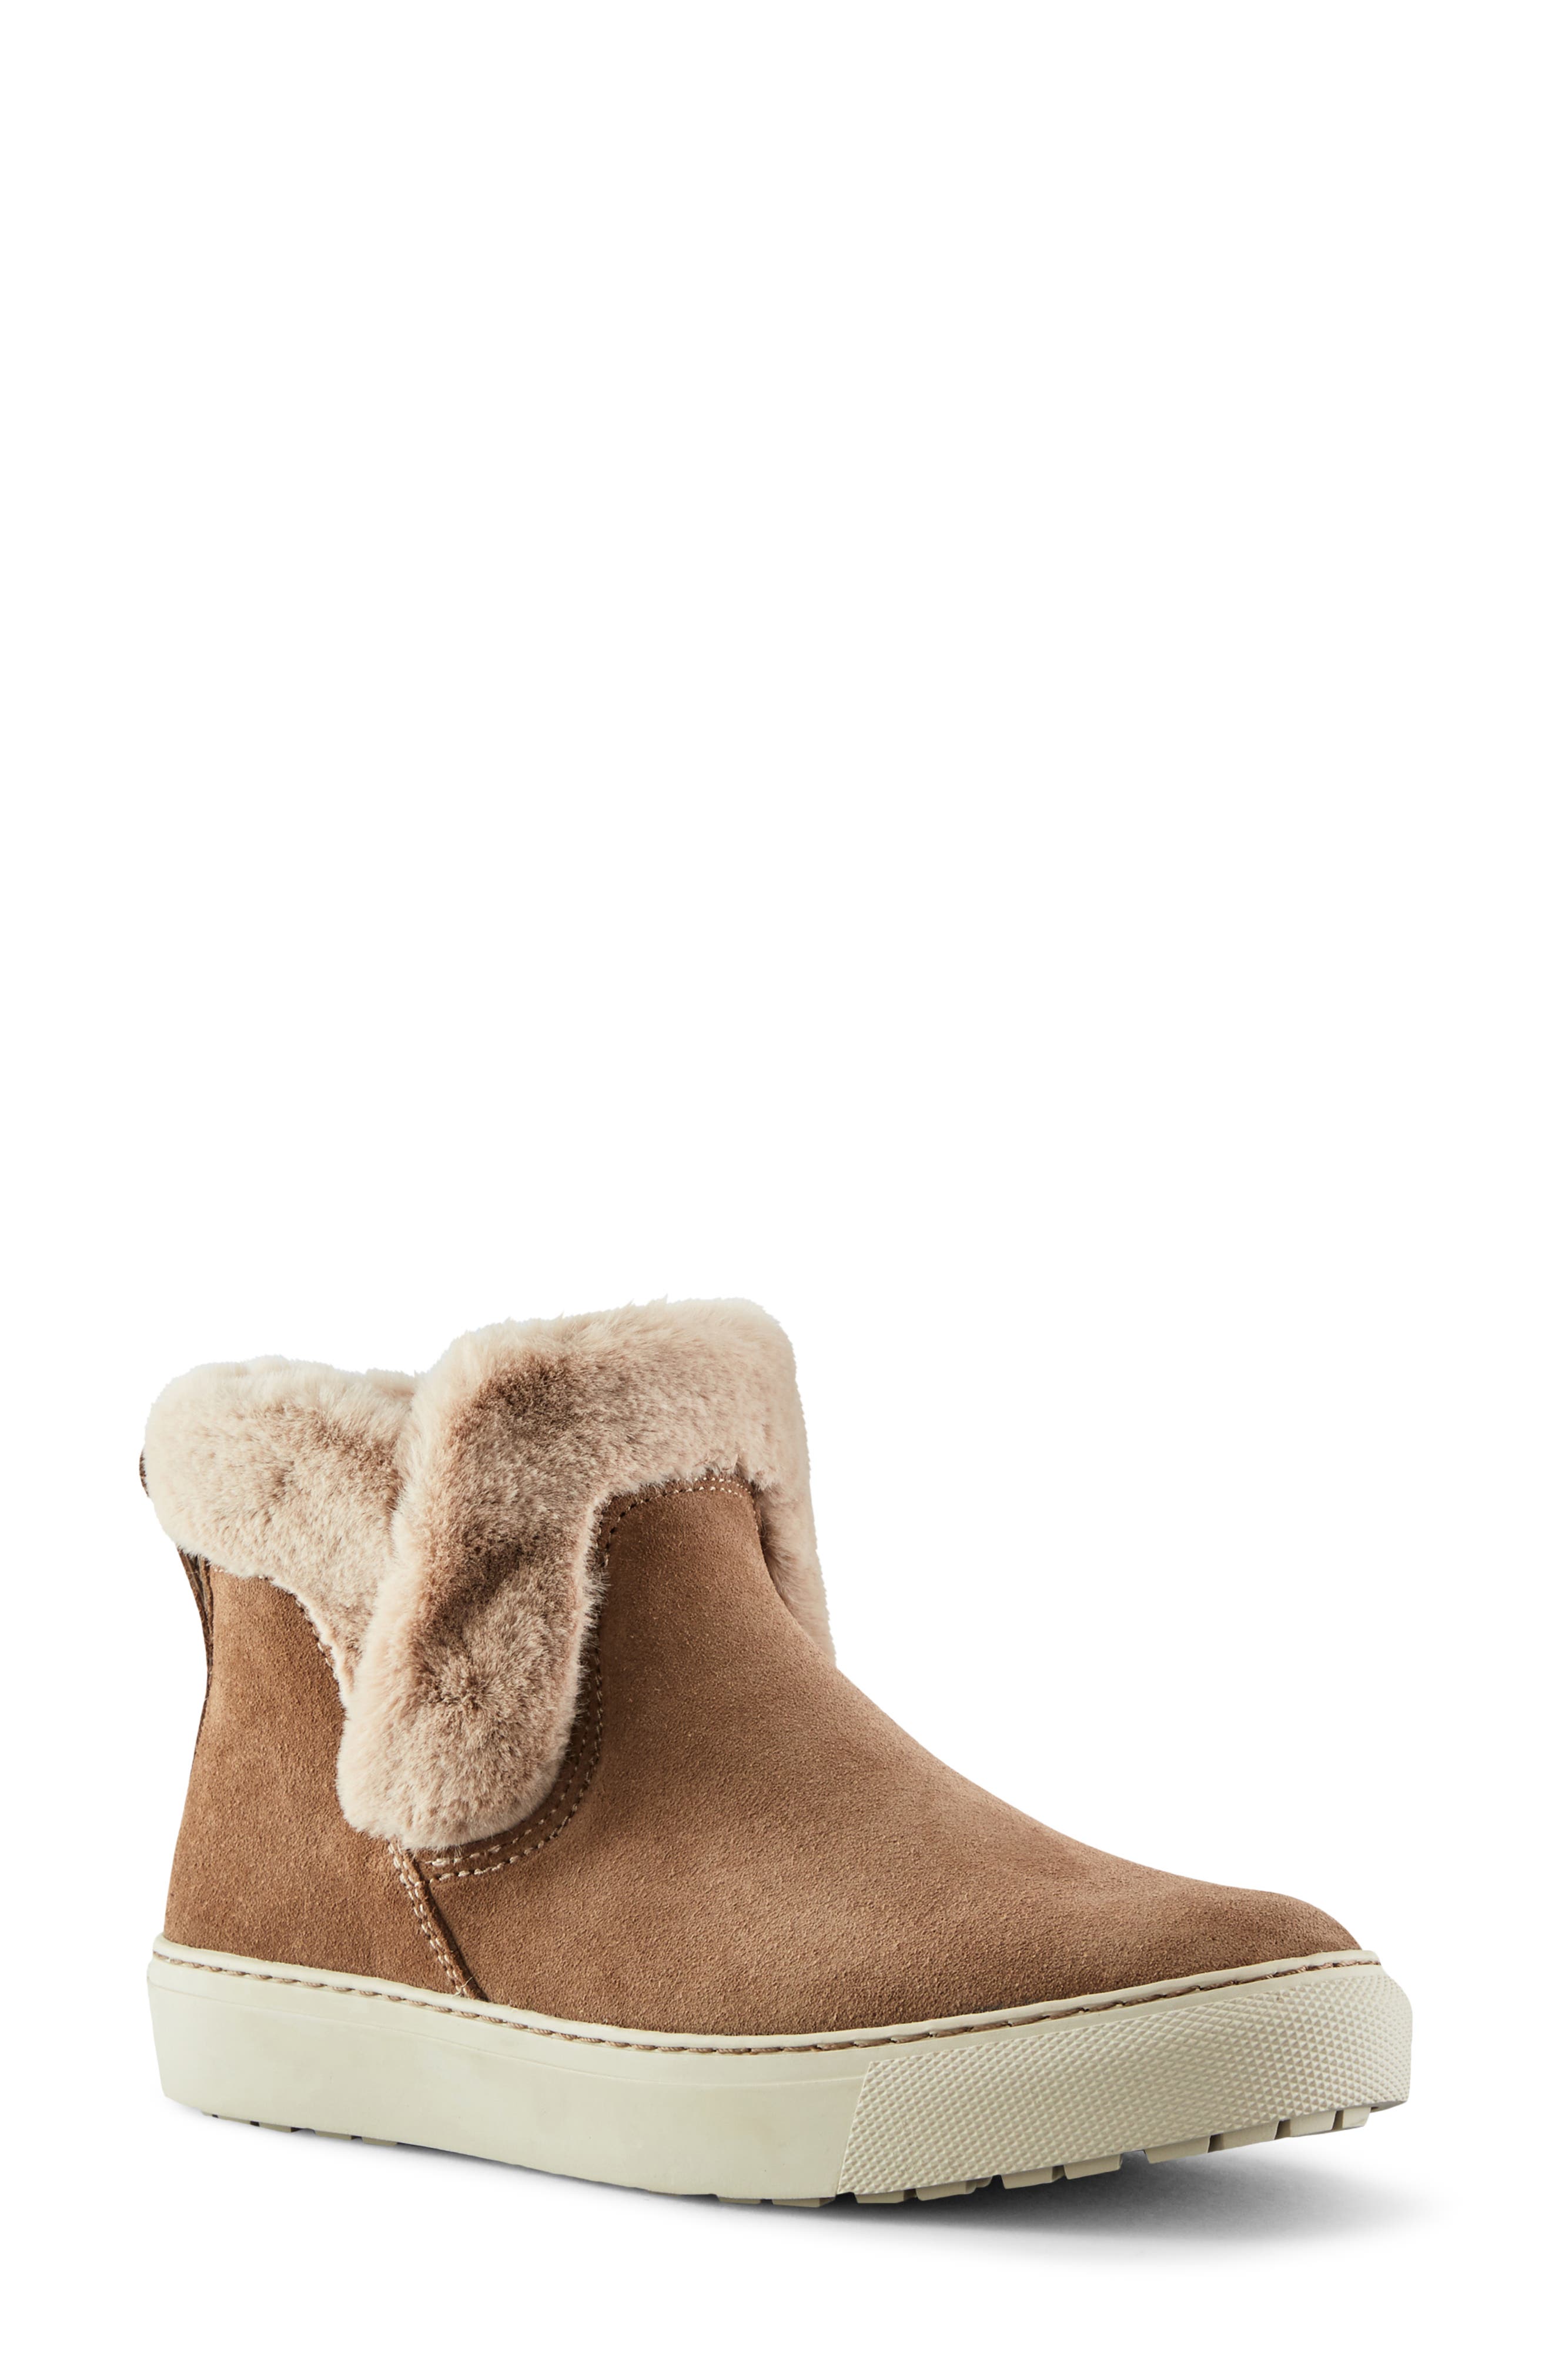 cougar fargo ankle boots